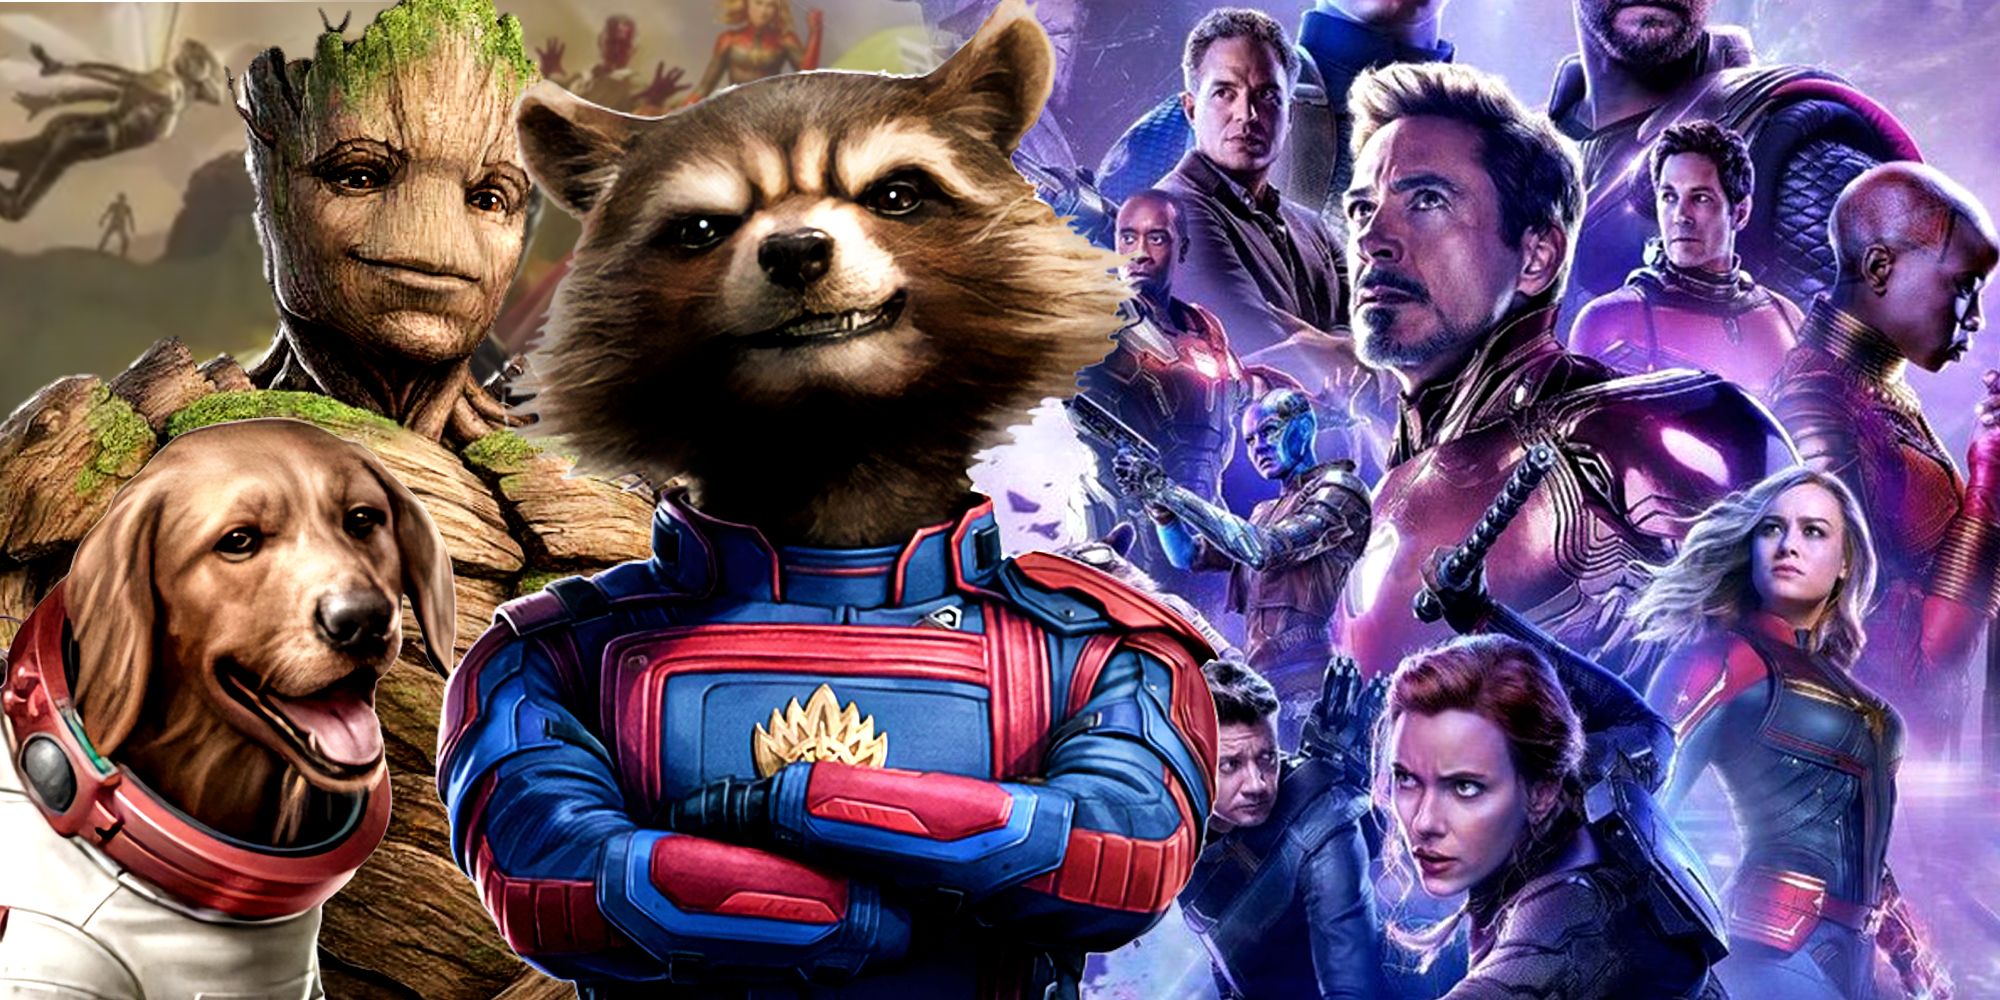 Montage of the Guardians of the Galaxy — Rocket, Cosmo, and Groot — and a poster from Avengers: Endgame.